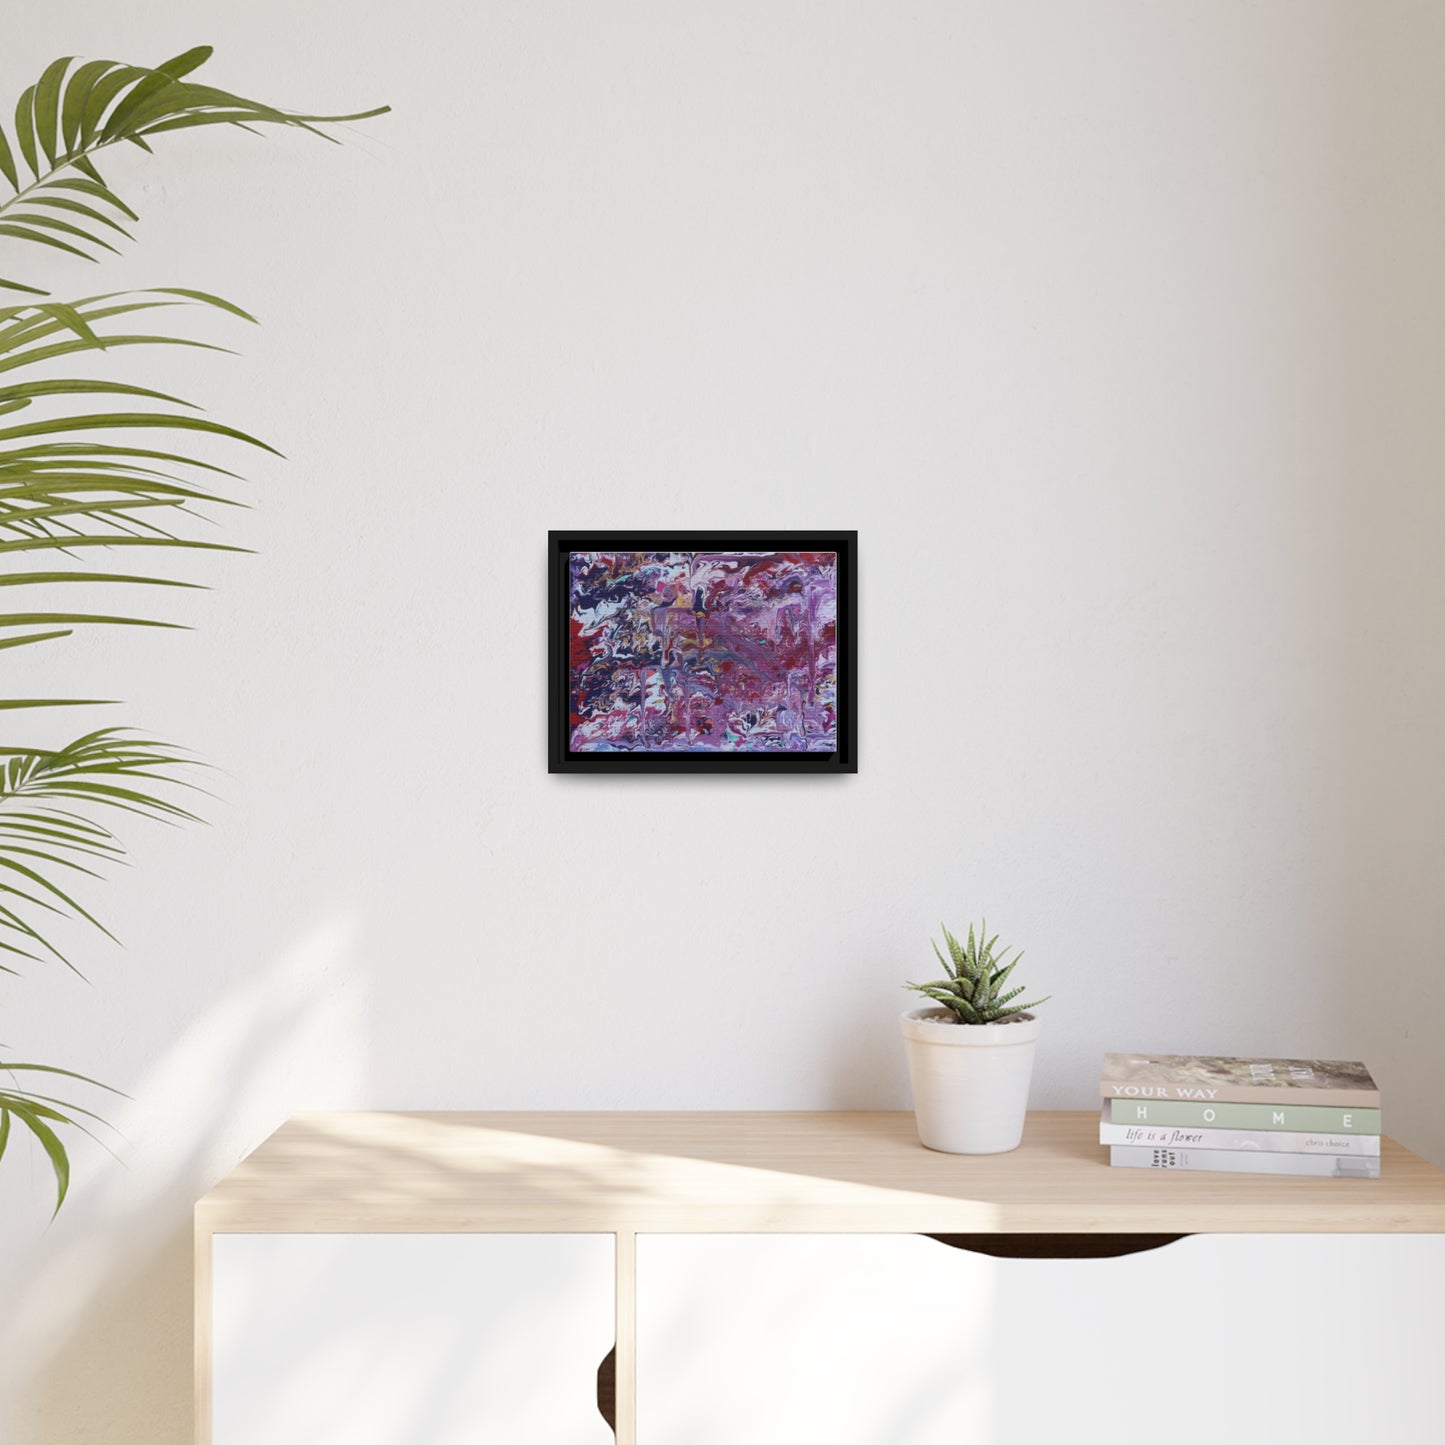 Azaela Sky by Fred Jones on Matte Canvas with Black Frame